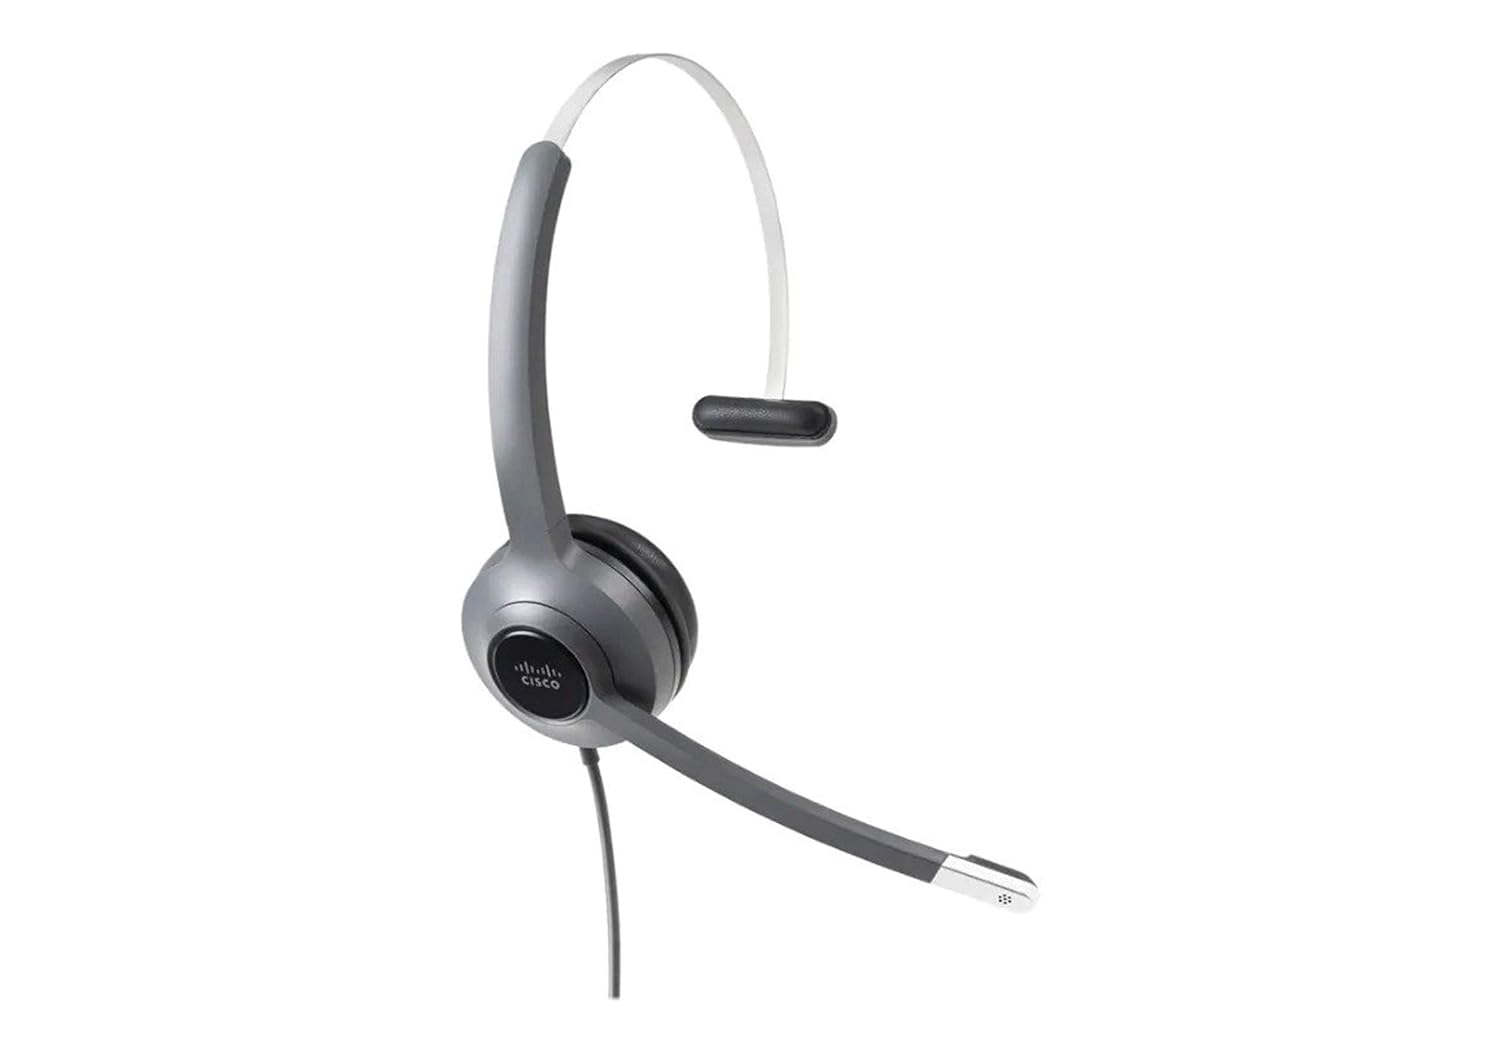 Cisco Headset 521, Wired Single On-Ear 3.5mm Headset with USB-A Adapter, Charcoal, 2-Year Limited Liability Warranty (CP-HS-W-521-USB=)